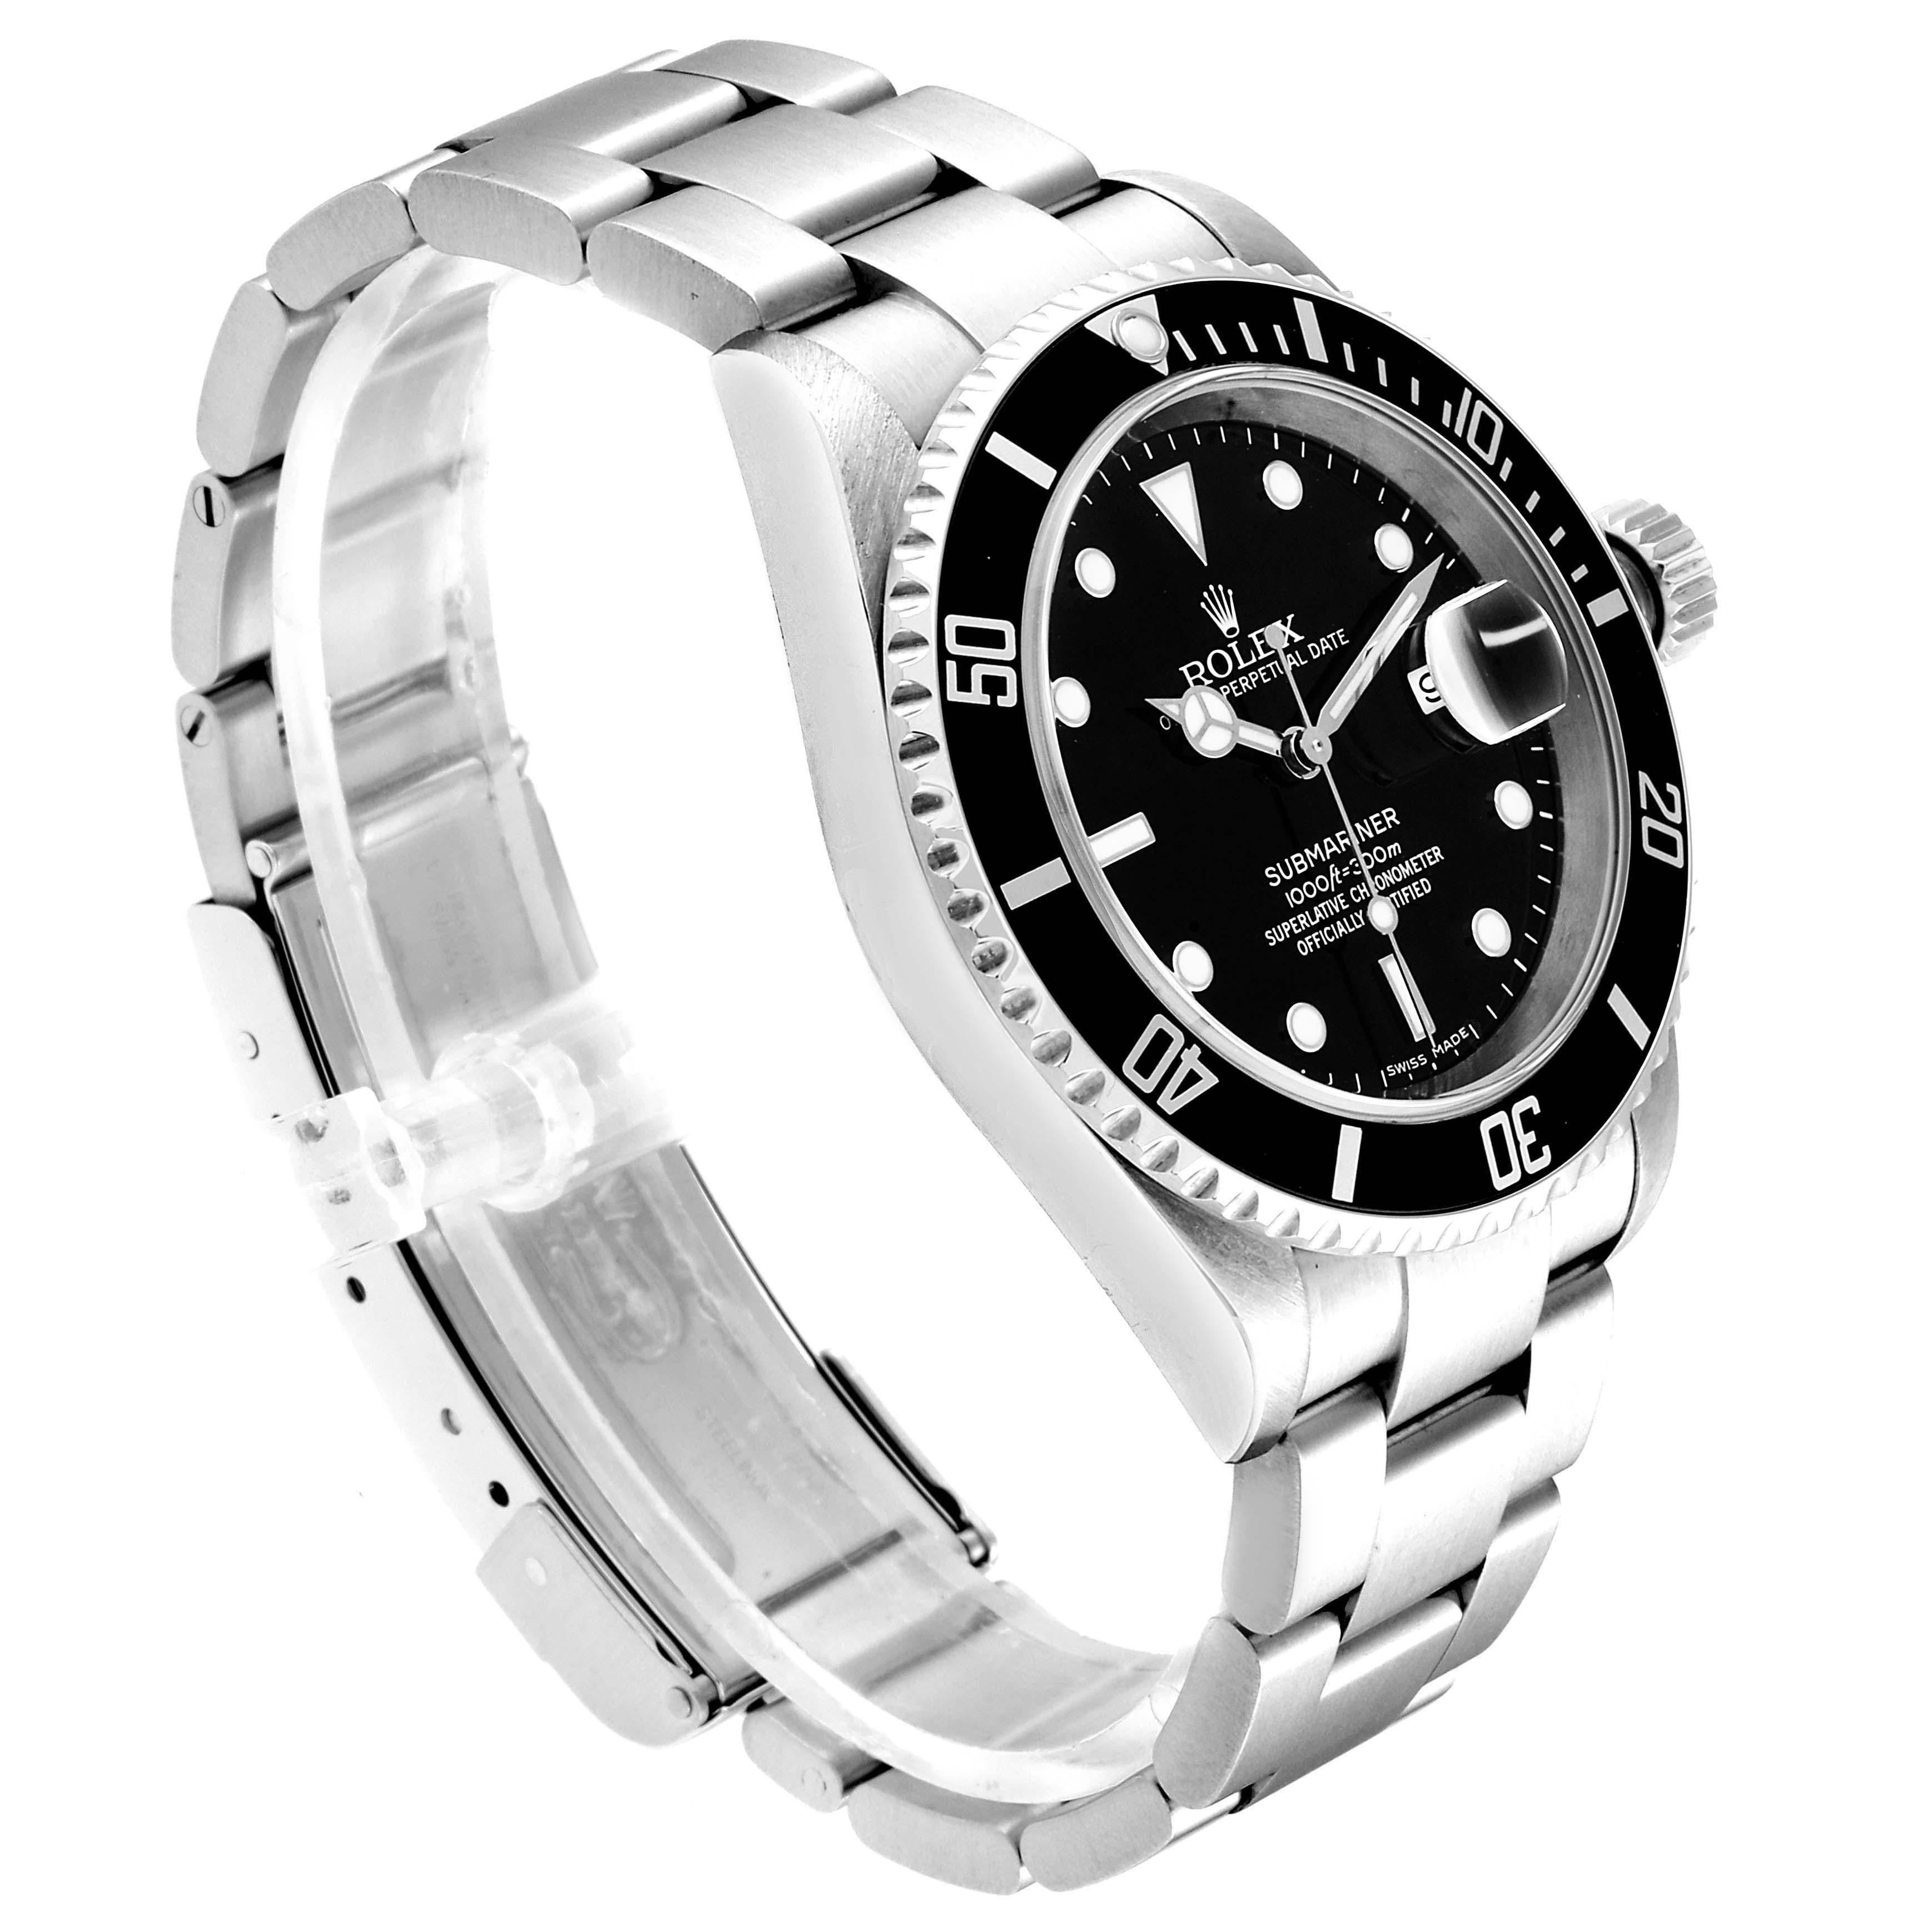 Rolex Submariner Date Stainless Steel Men's Watch 16610 In Excellent Condition For Sale In Atlanta, GA